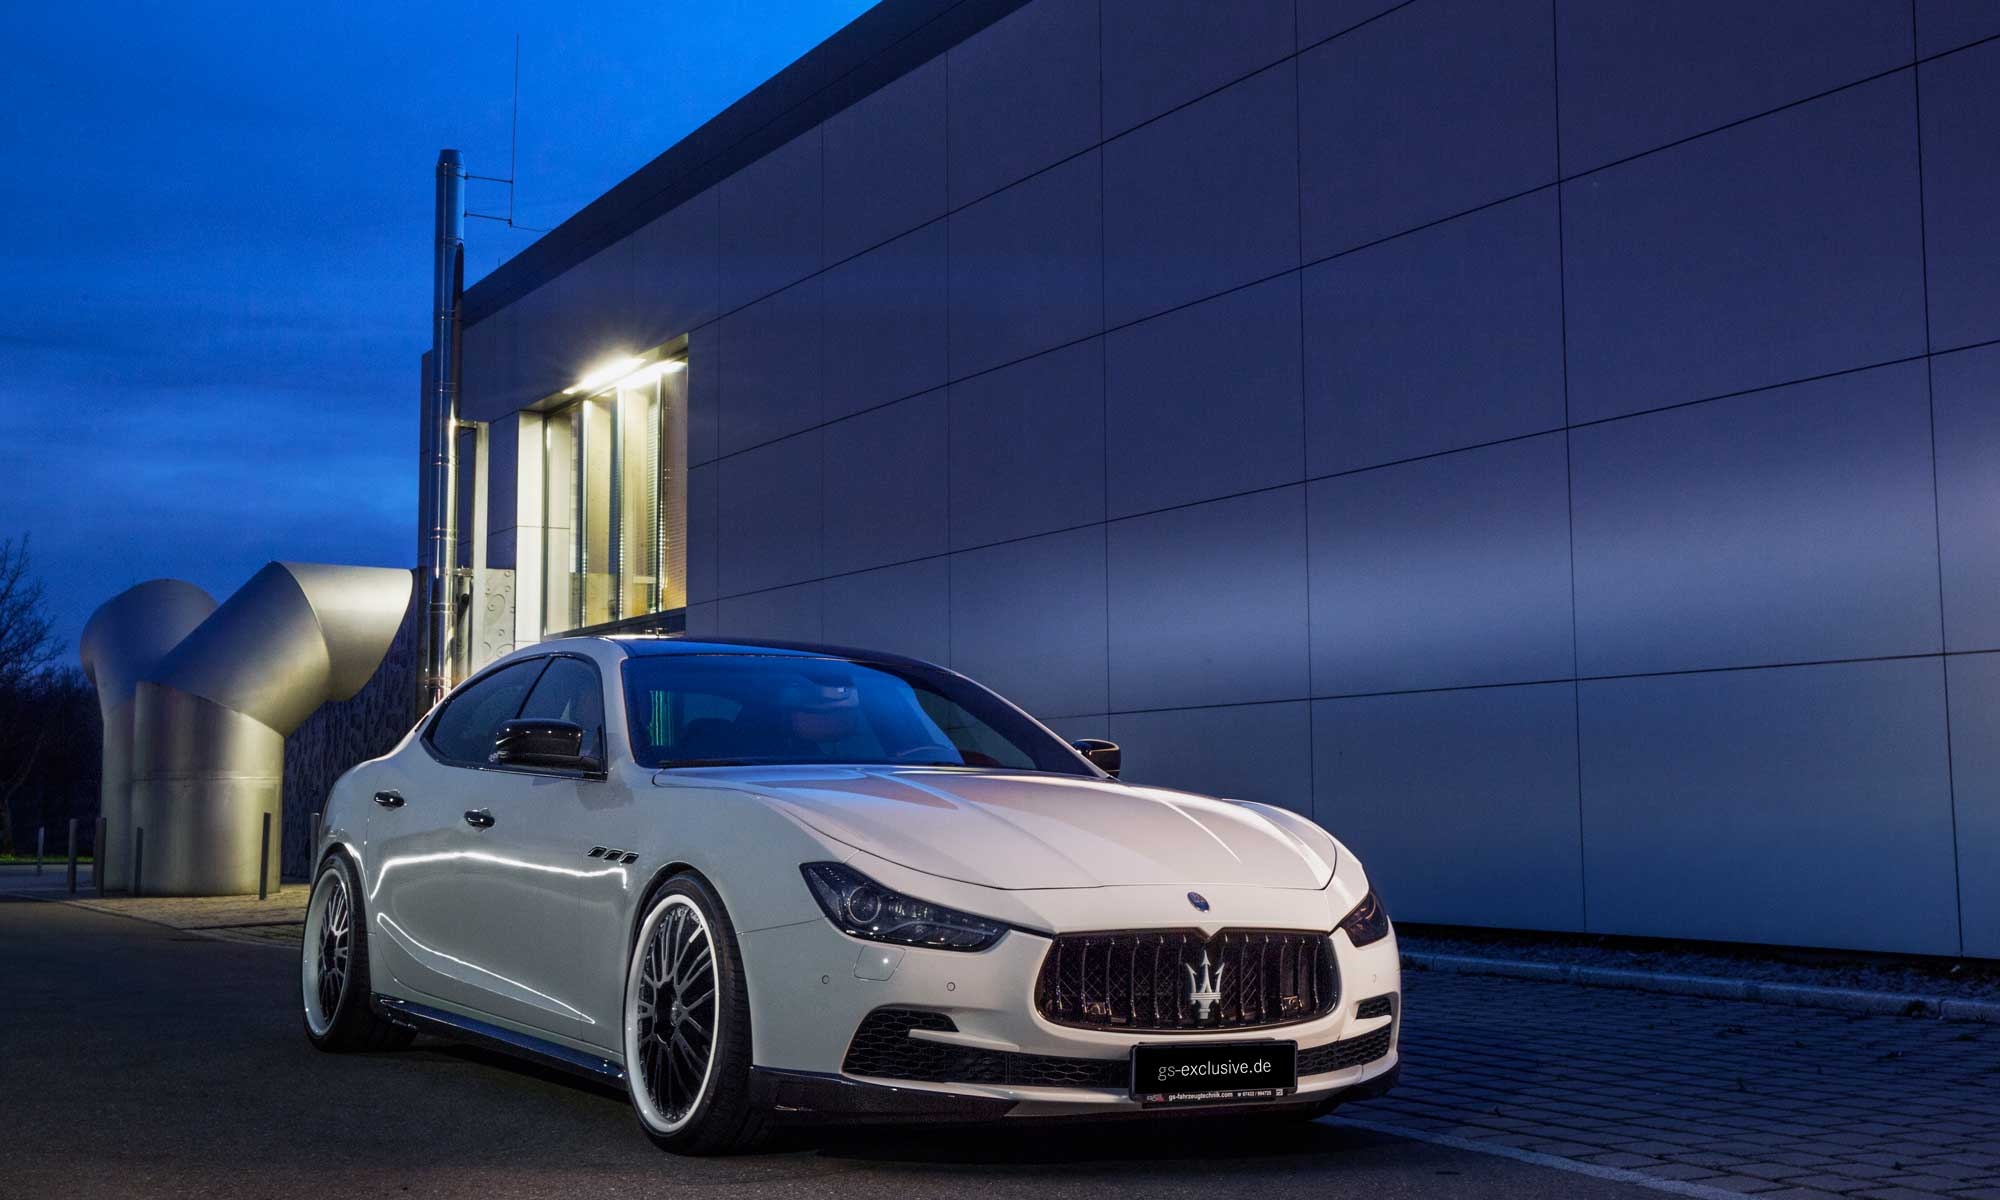 Maserati Ghibli, Tuning by G&S Exclusive, Aggressive stance, Enhanced performance, 2000x1200 HD Desktop